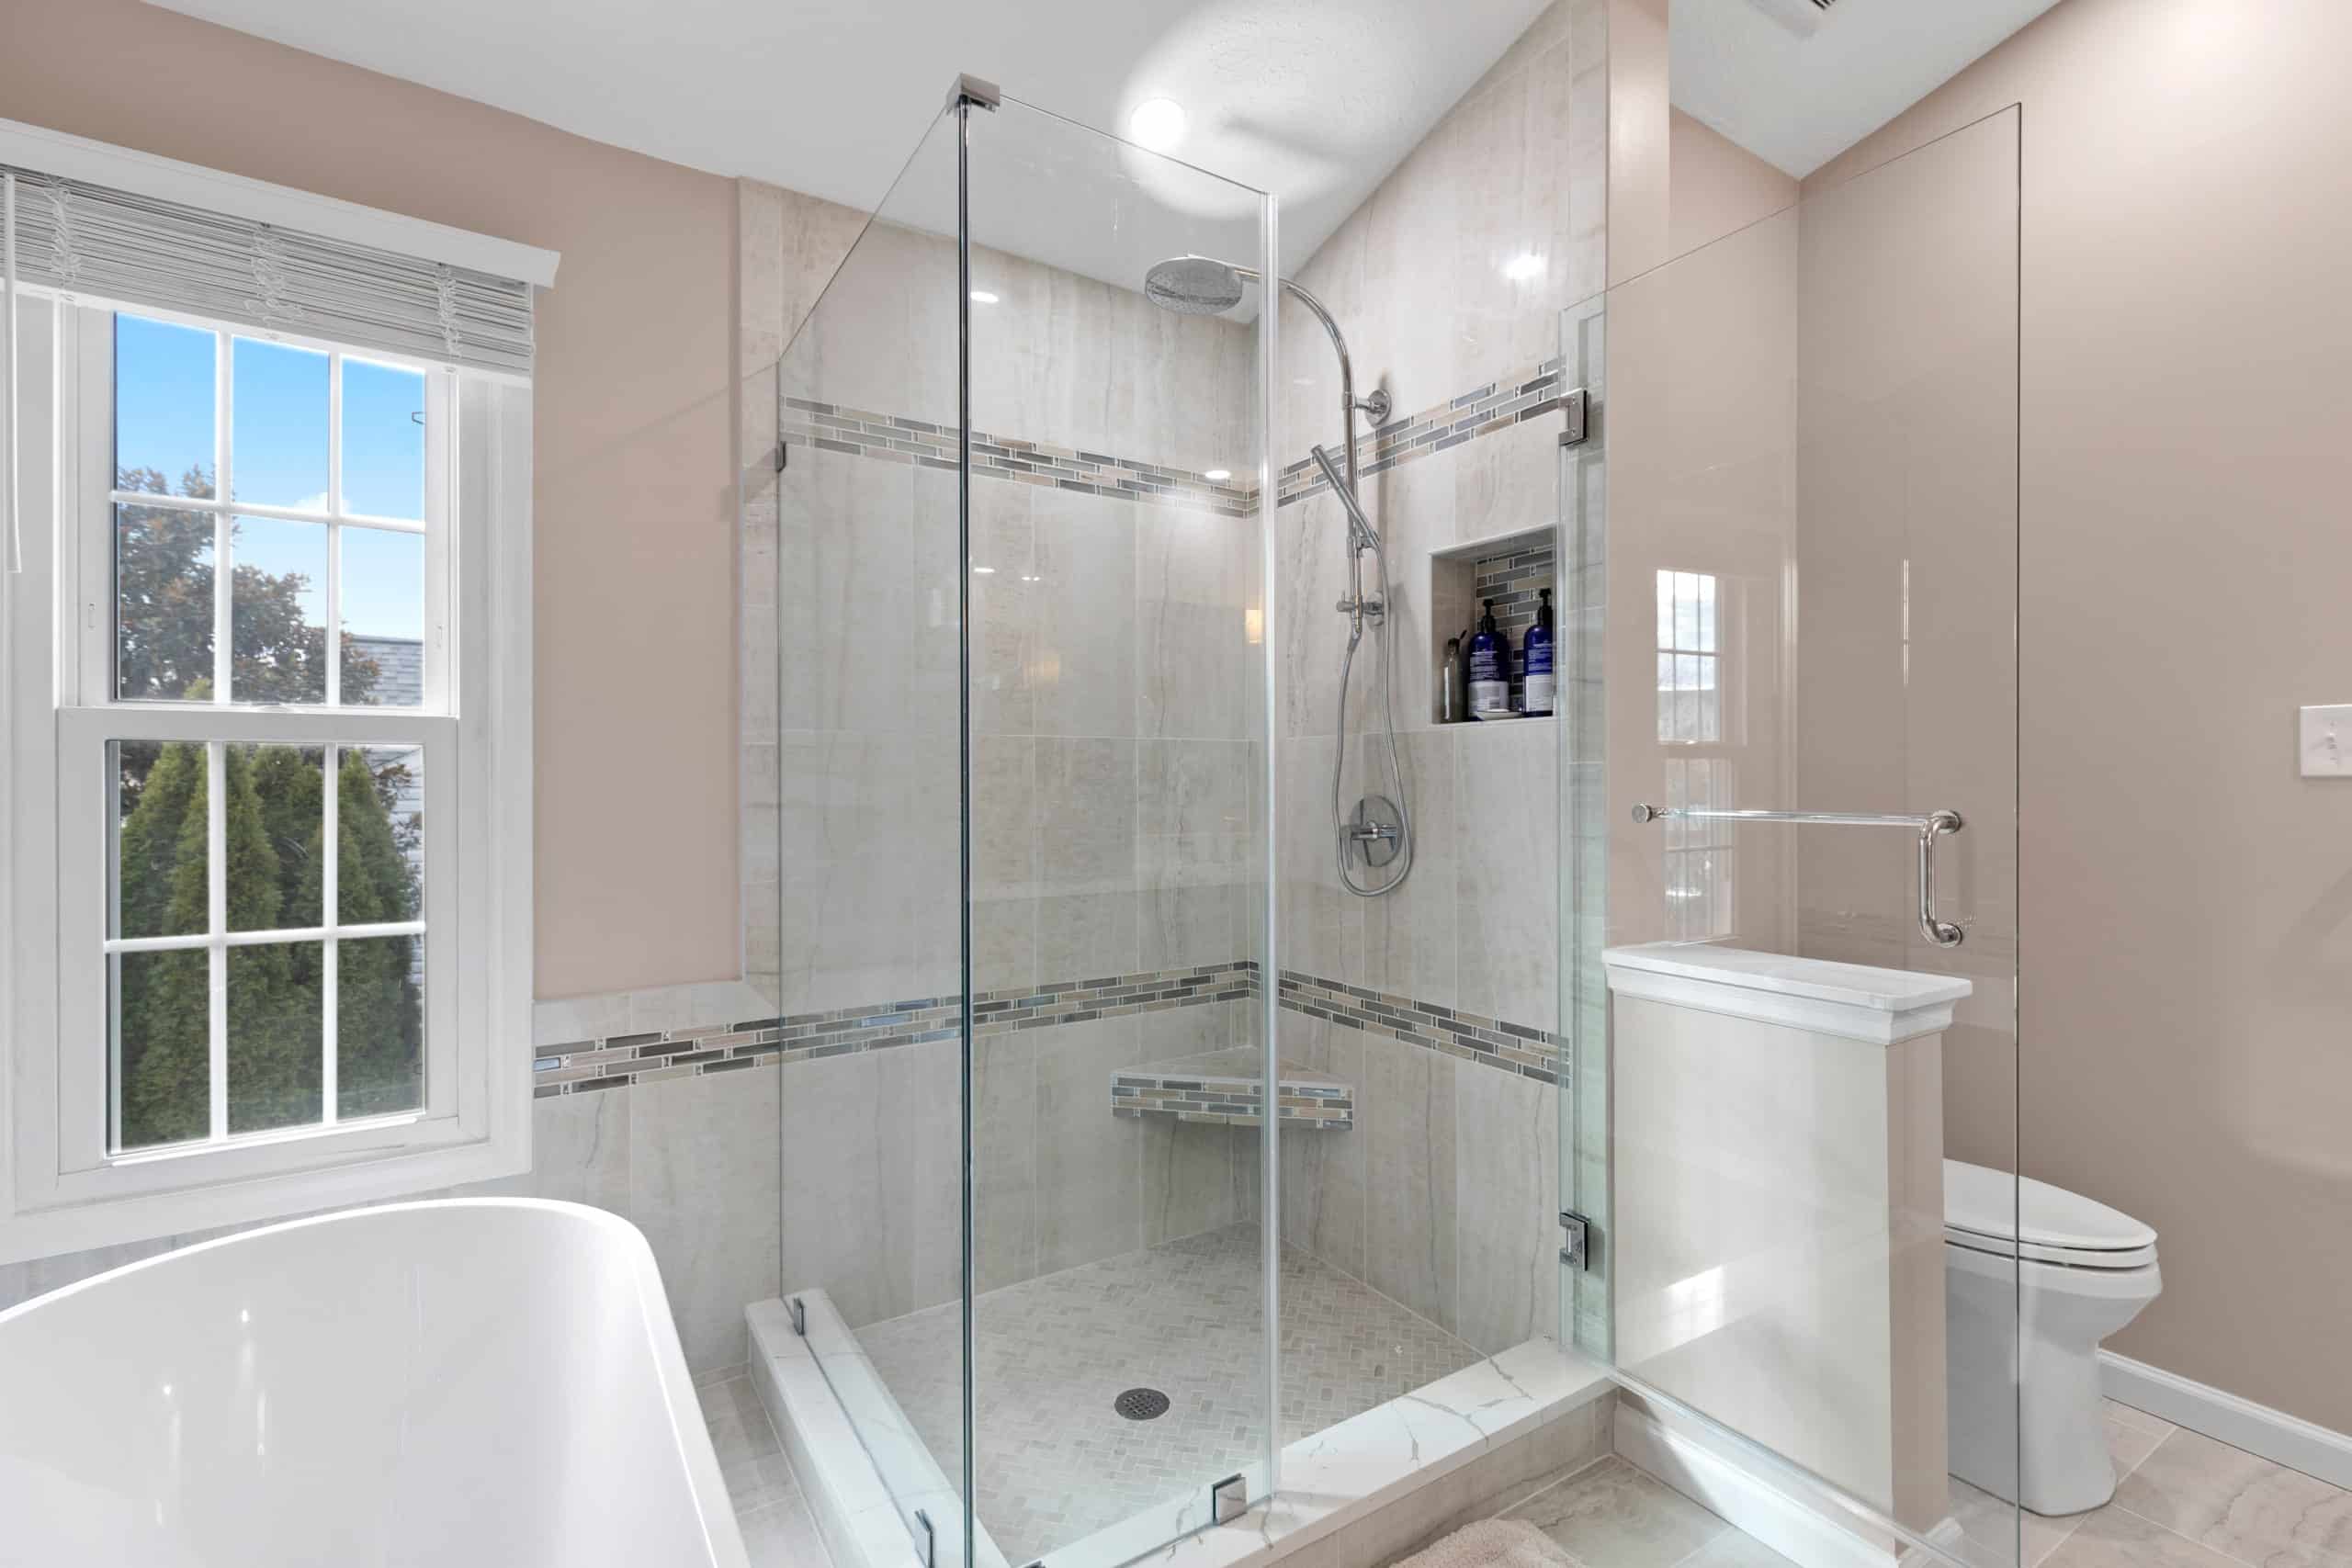 Light pink bathroom with elegant walk-in shower, tub, and toilet